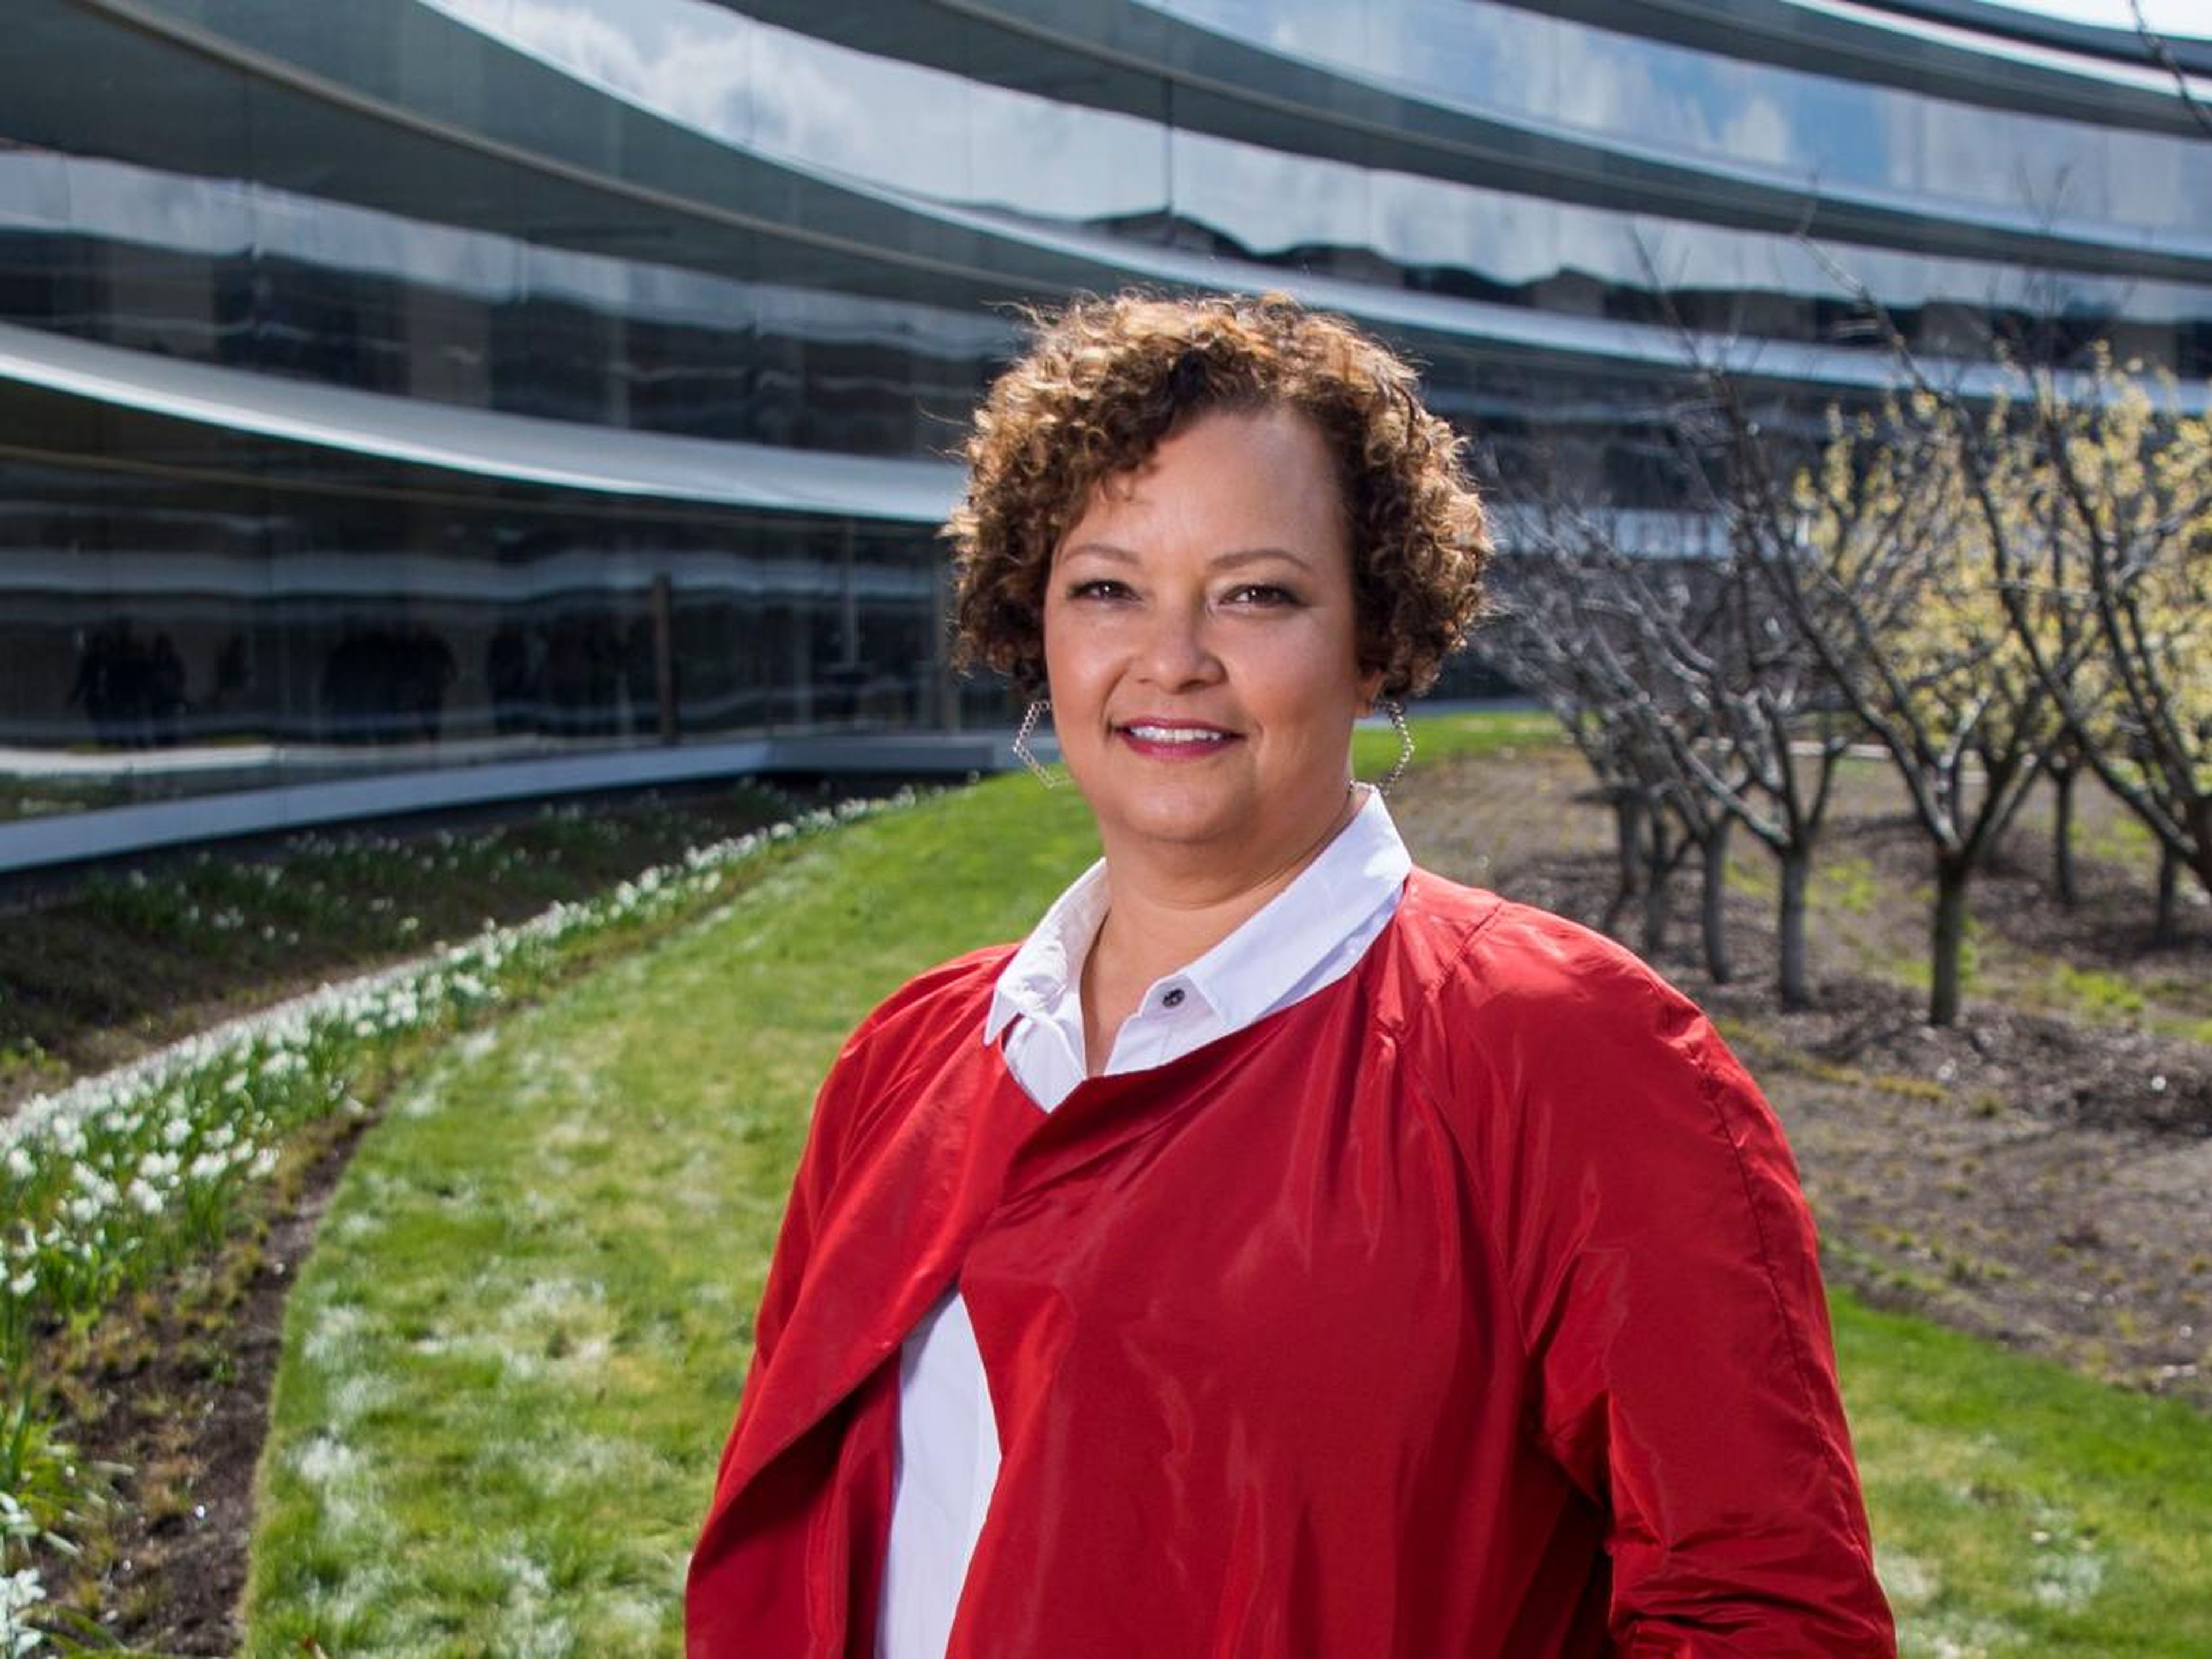 Lisa Jackson, the vice president of environment, policy, and social initiatives at Apple, is showing the world that corporate success and environmental responsibility are a winning formula